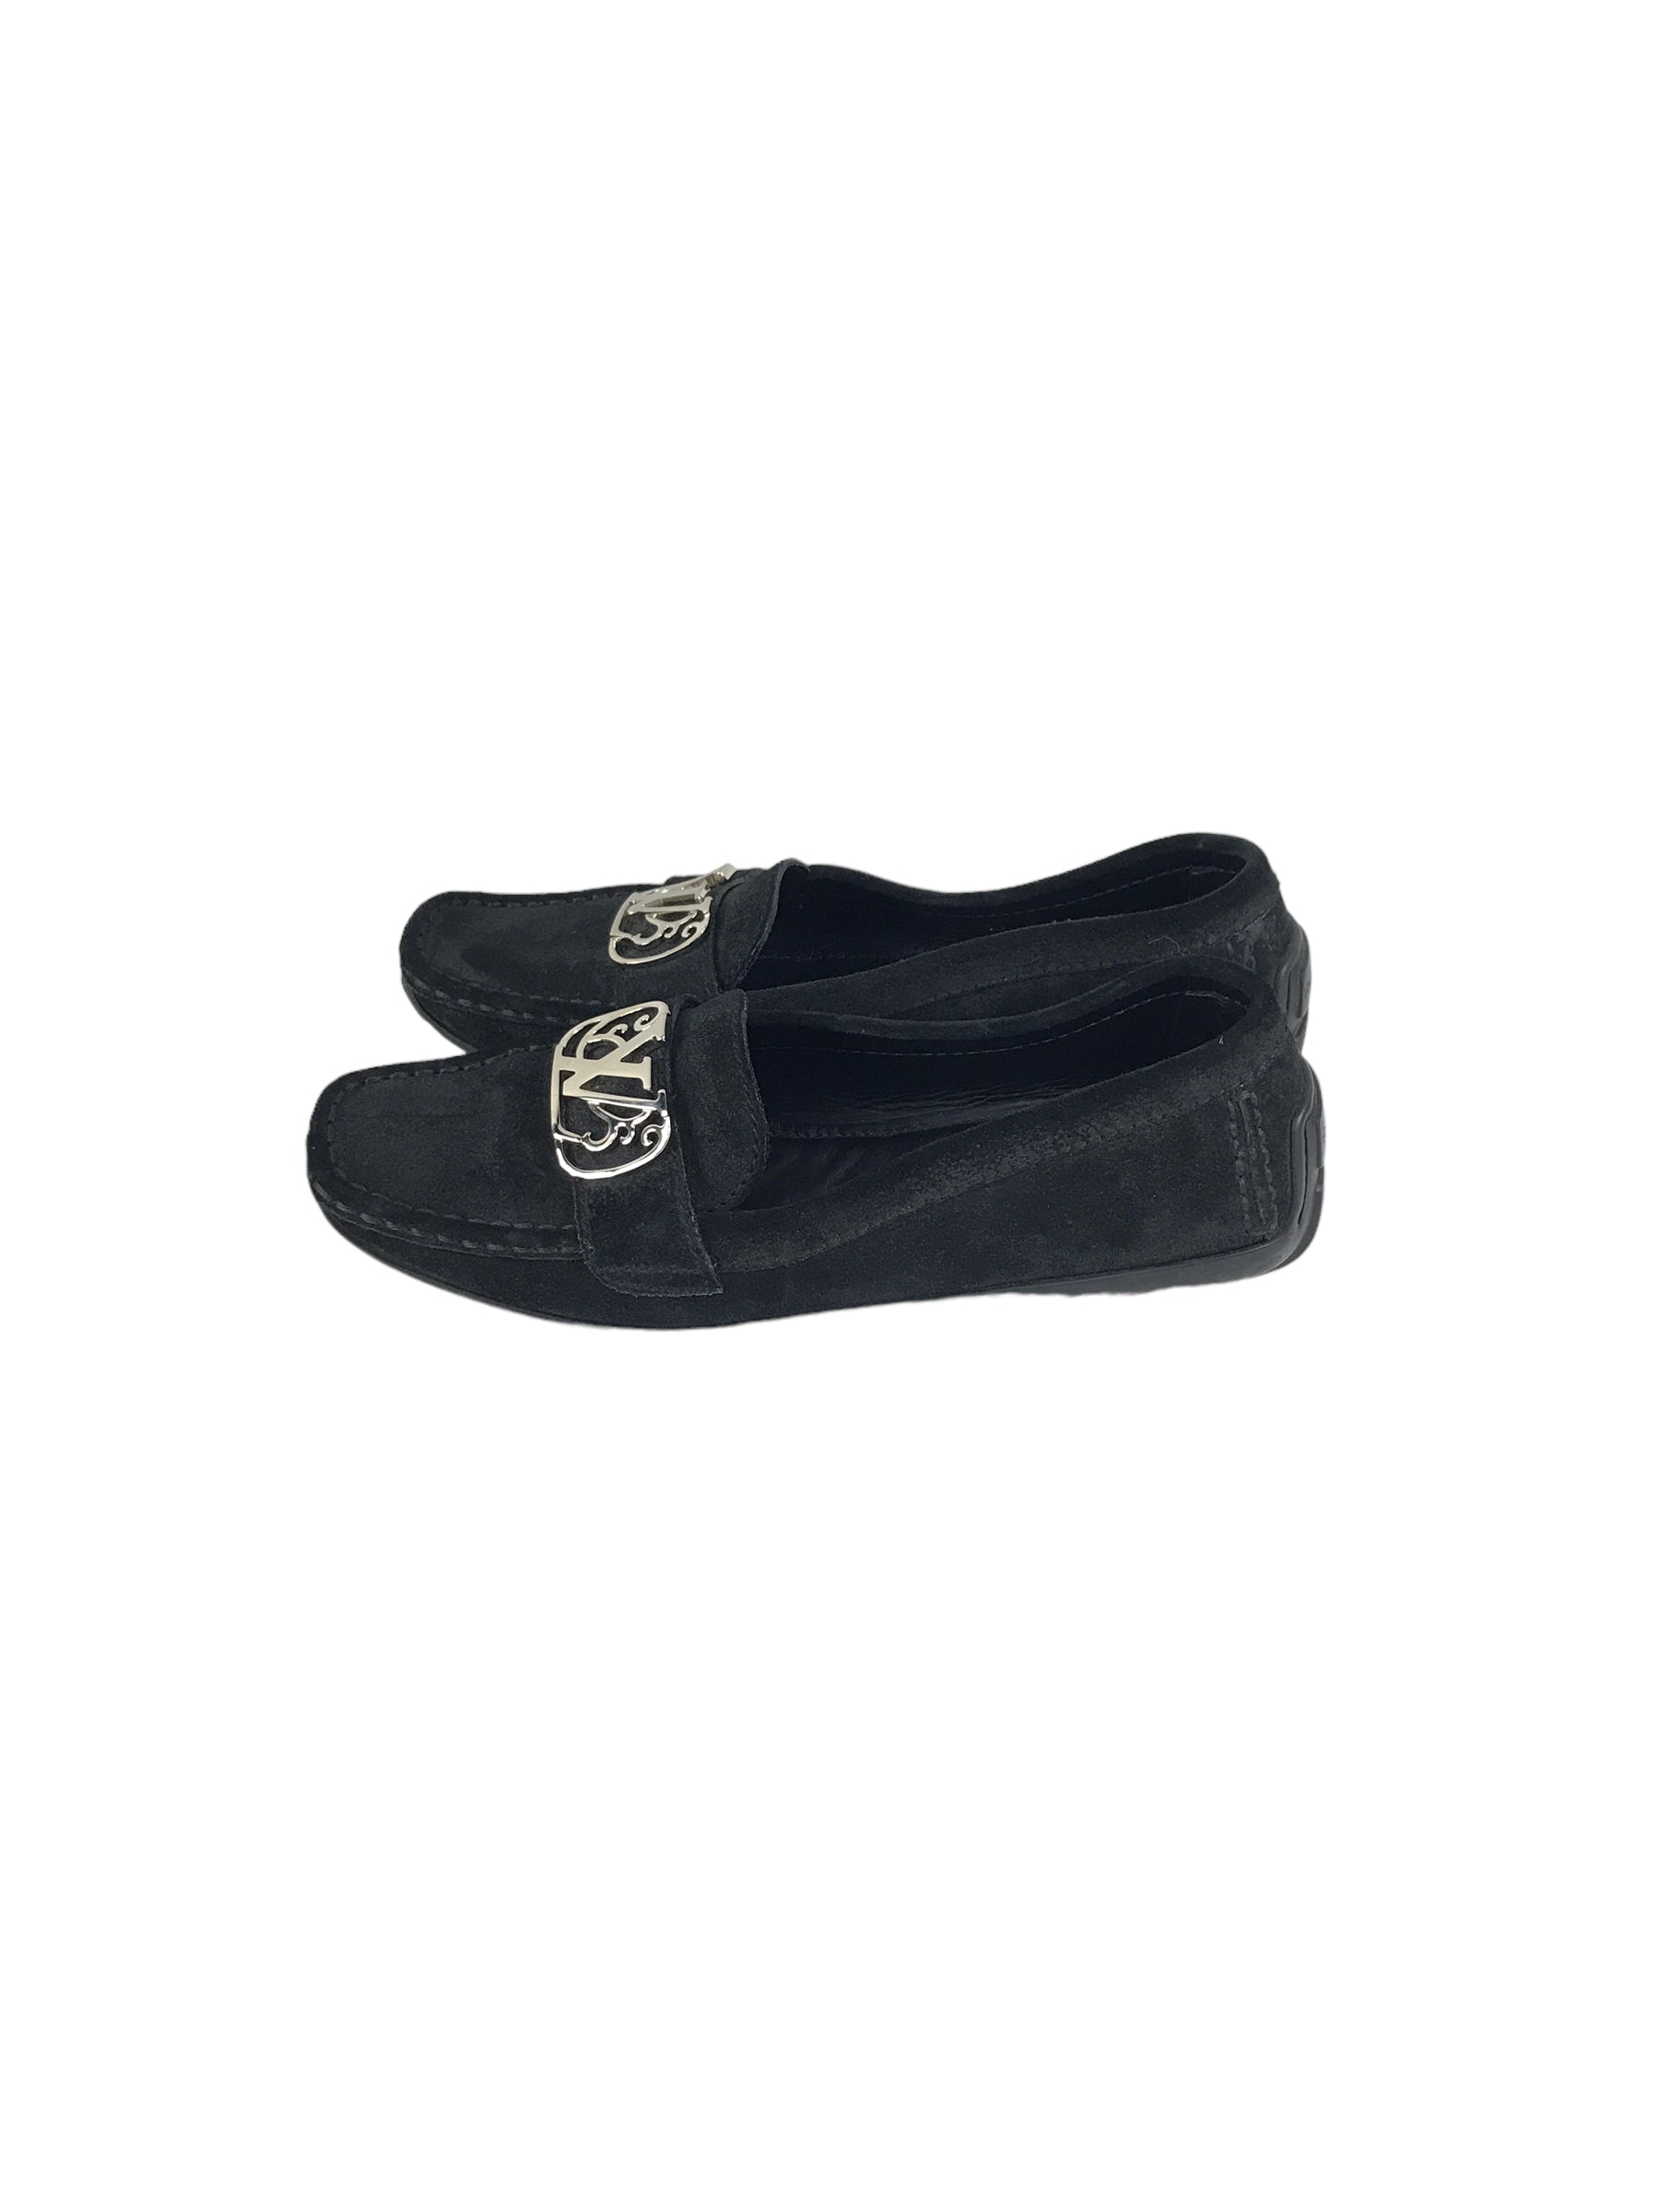 Monogram Black Suede Drivers Loafers W/SHW